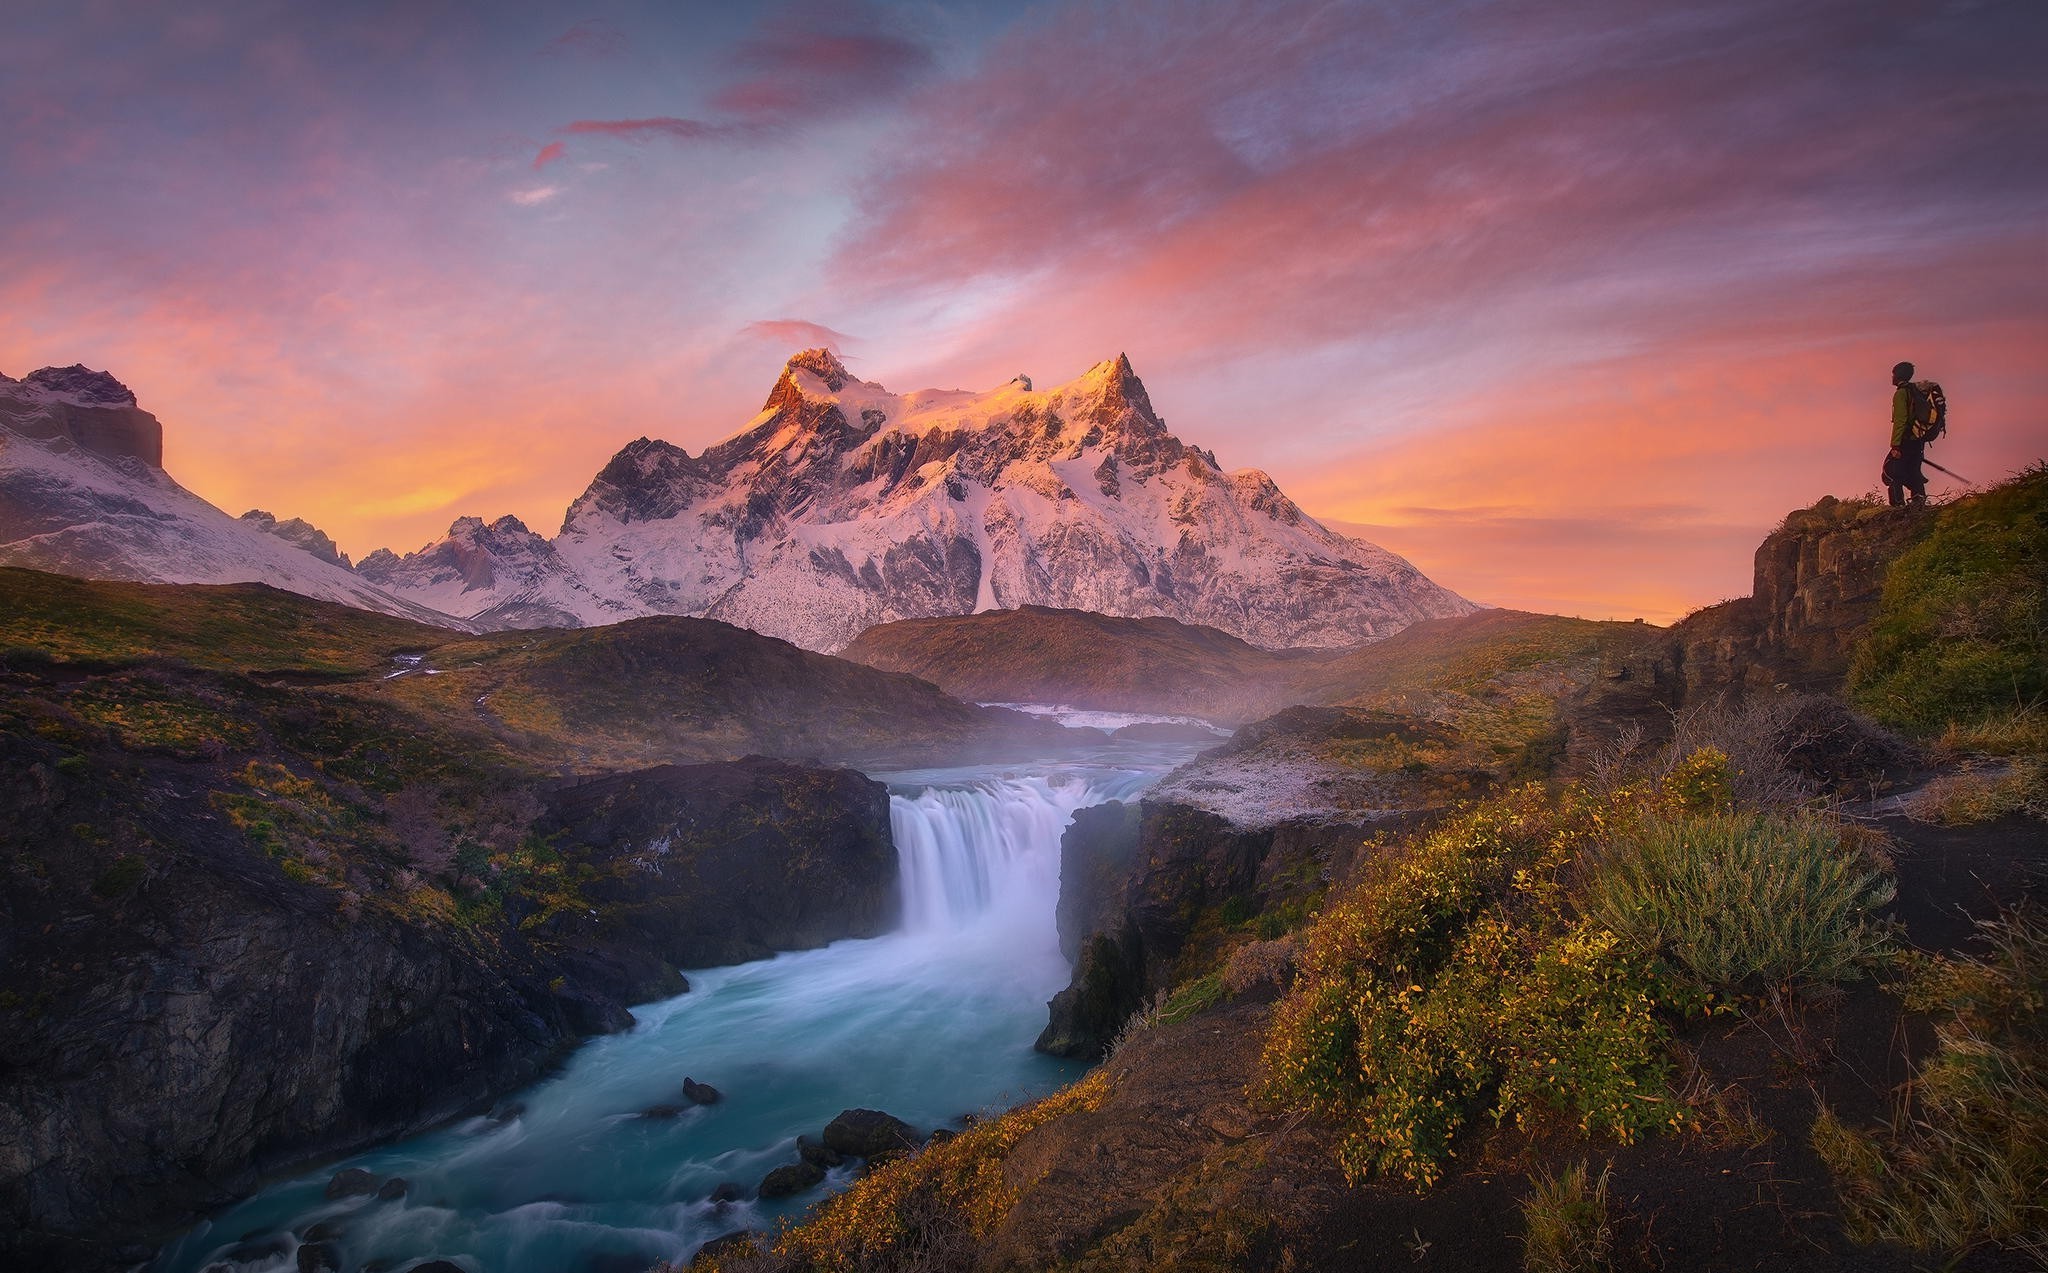 sunrise, Mountain, River, Waterfall, Torres Del Paine, Chile, Snowy Peak, Clouds, Shrubs, Nature, Landscape Wallpaper